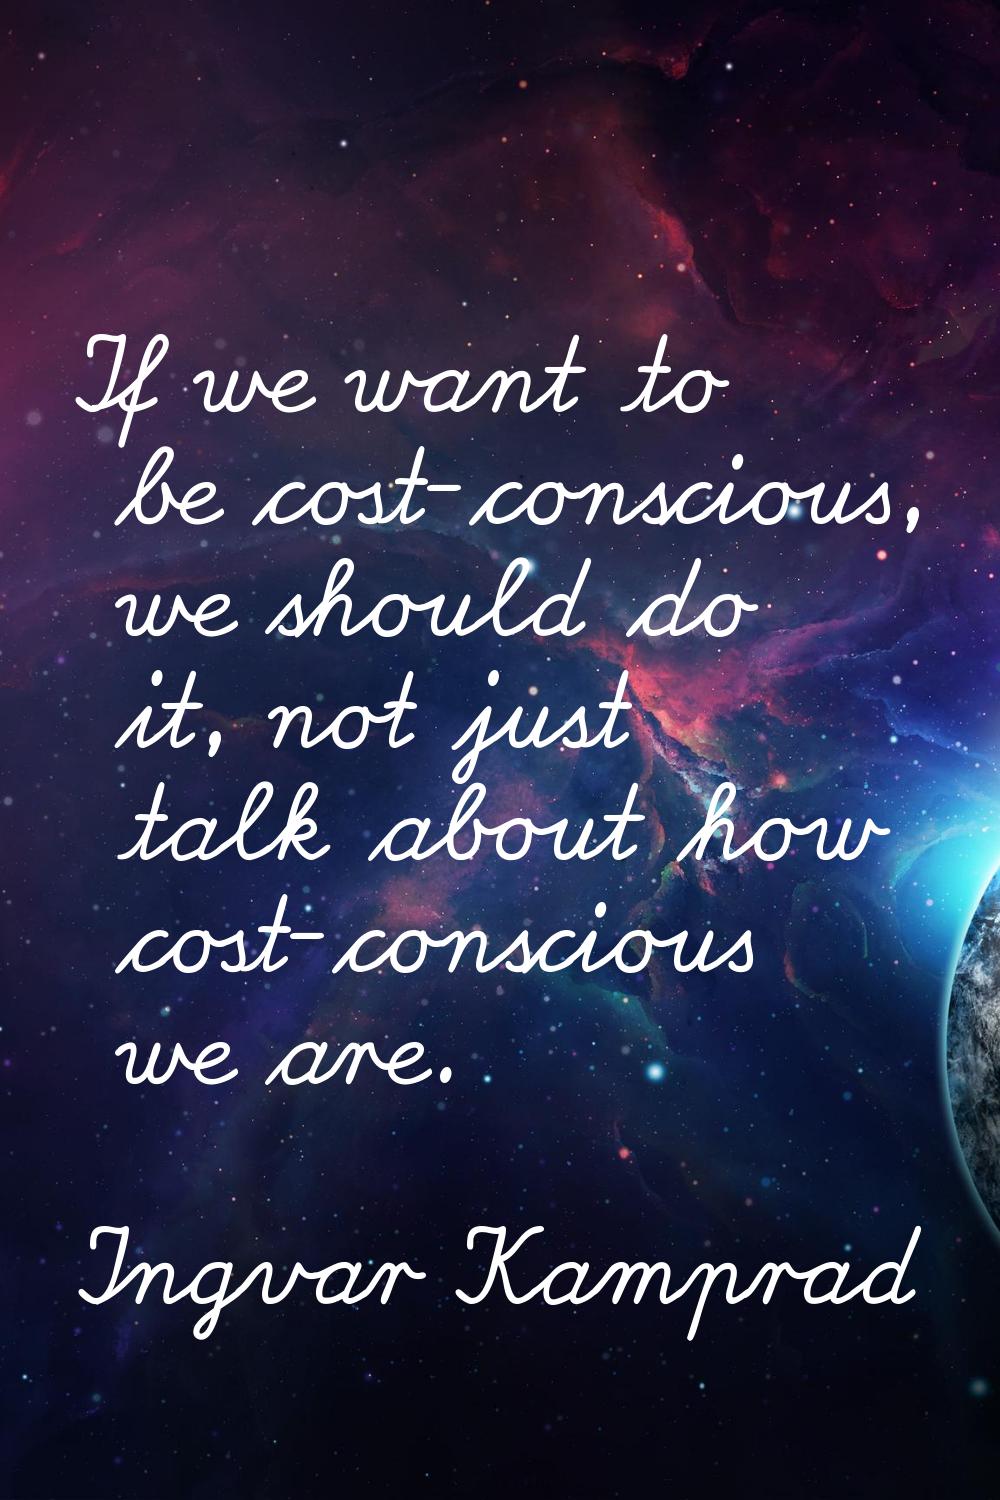 If we want to be cost-conscious, we should do it, not just talk about how cost-conscious we are.